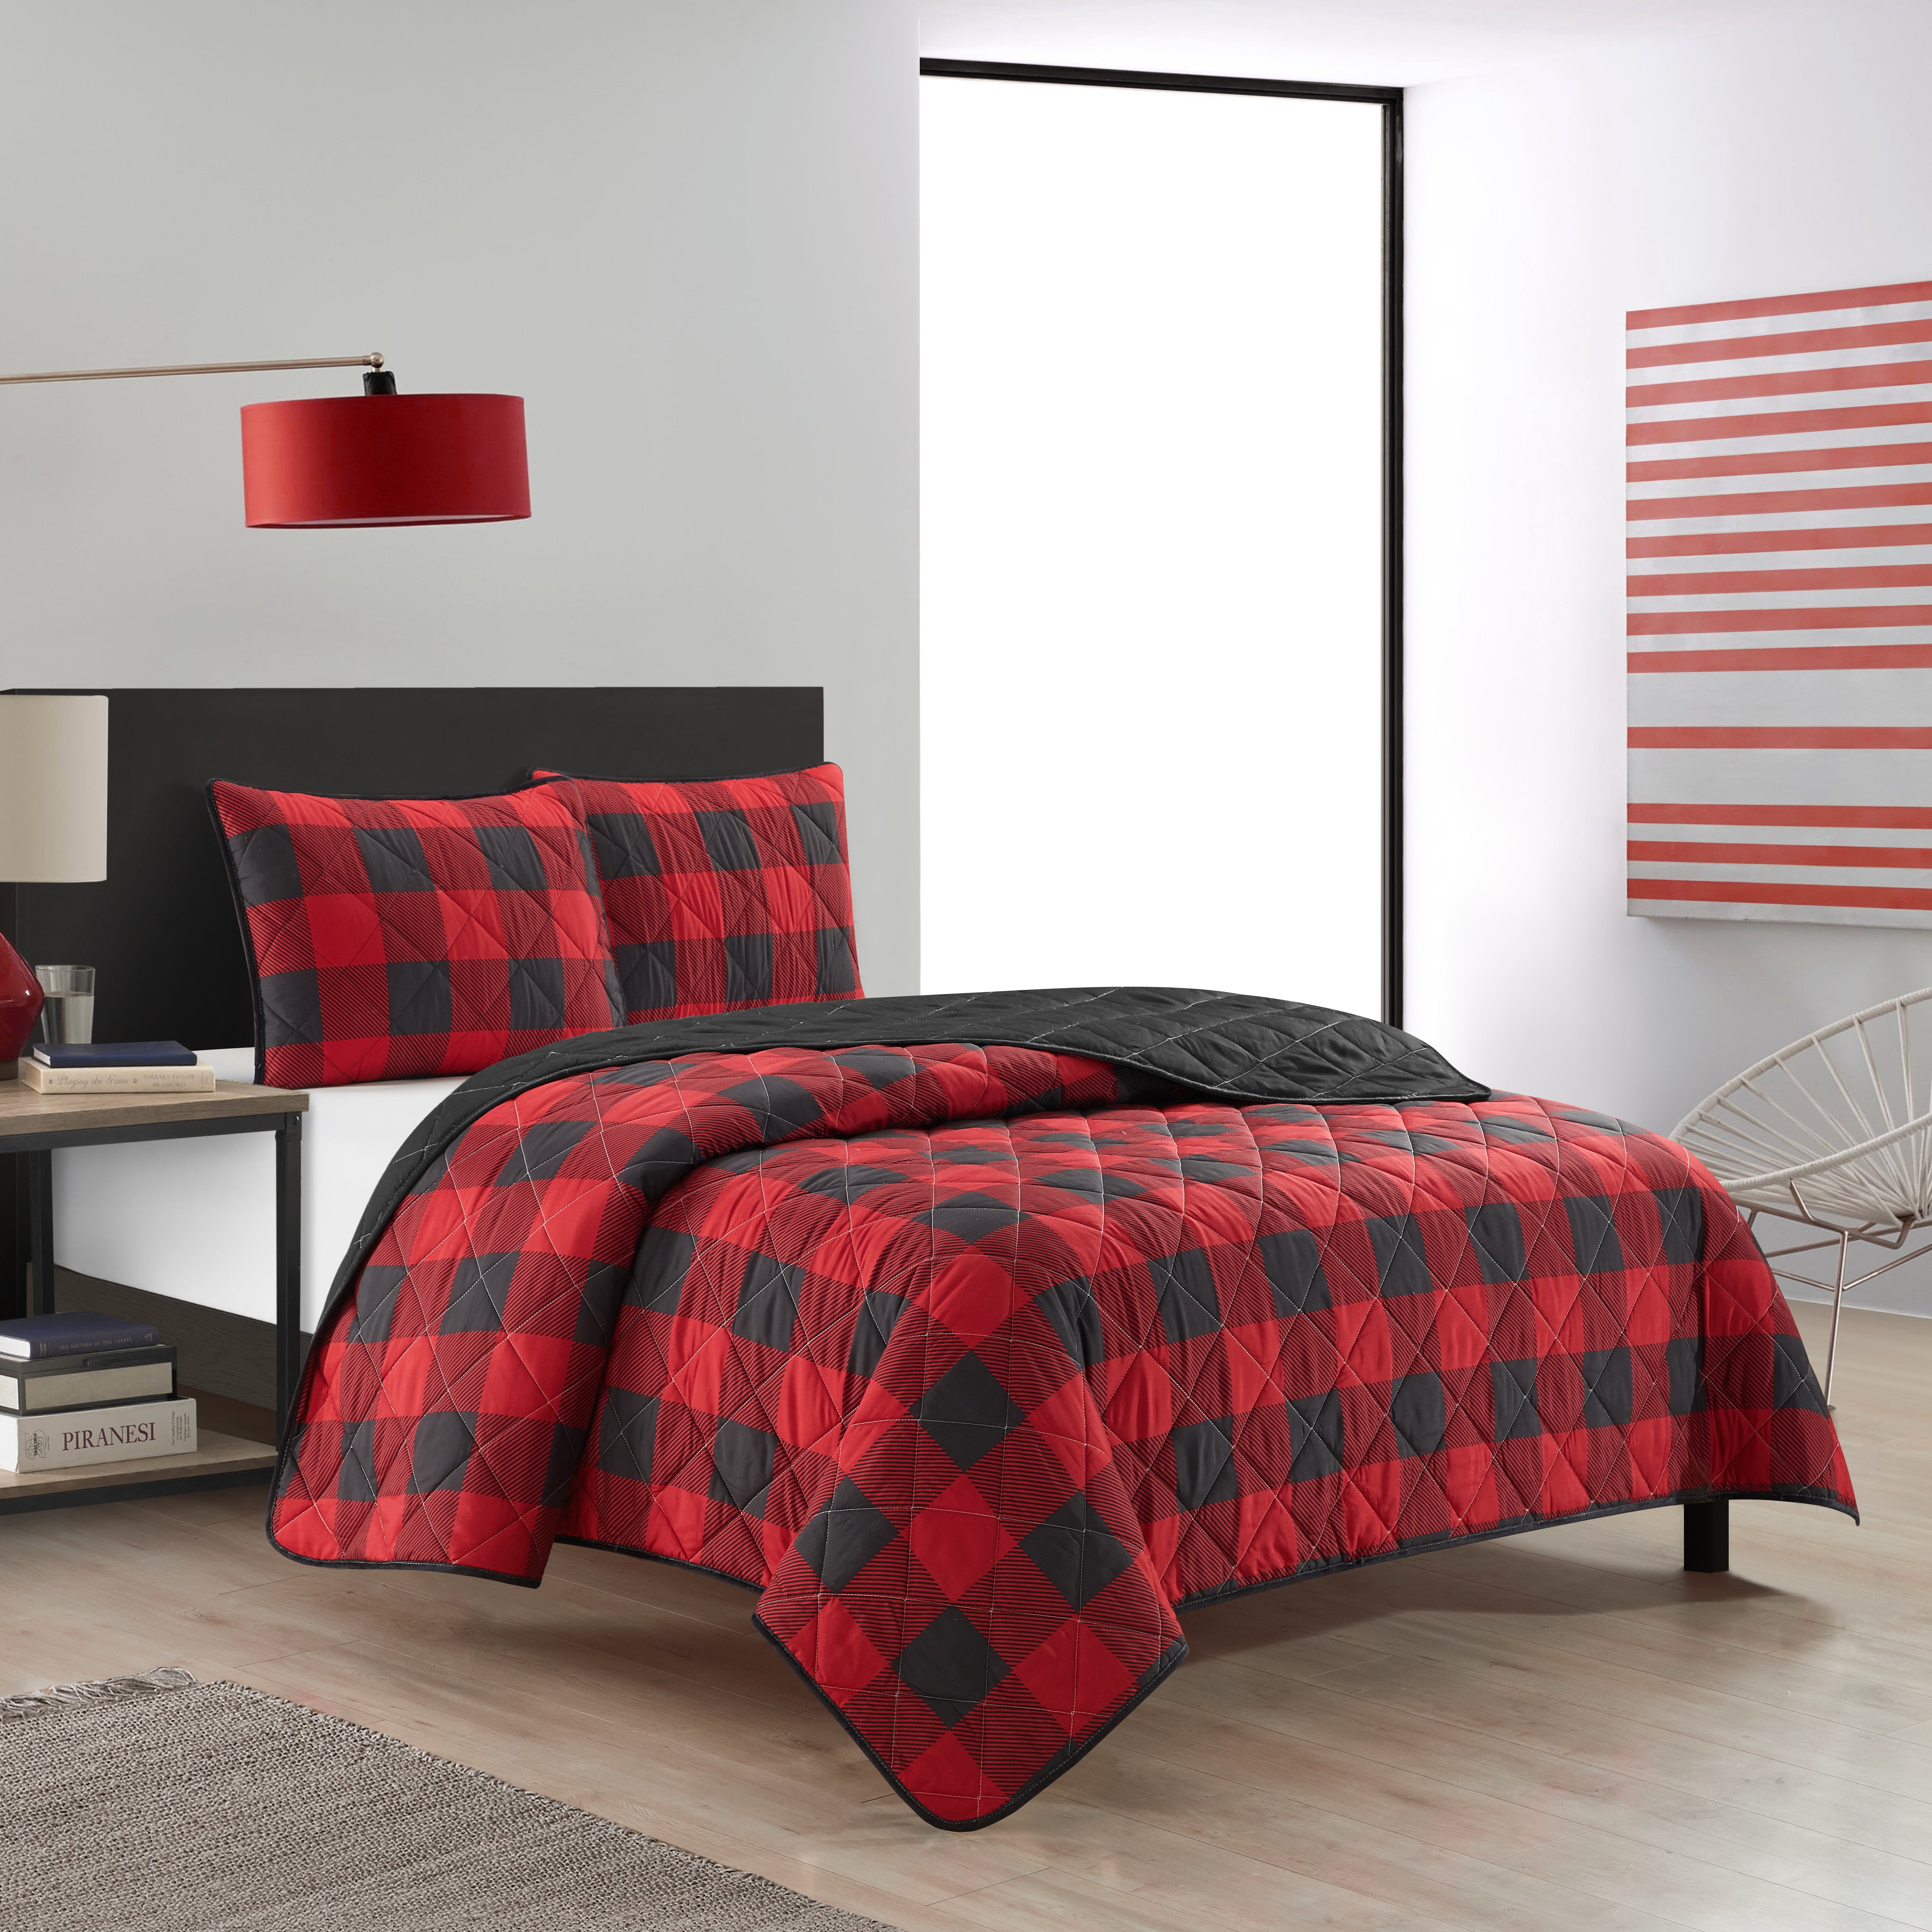 3-Piece Dearfoams Red Plaid Quilt Set (Full/Queen) $15.35 or (King) $17.10  + Free S&H w/ Walmart+ or $35+